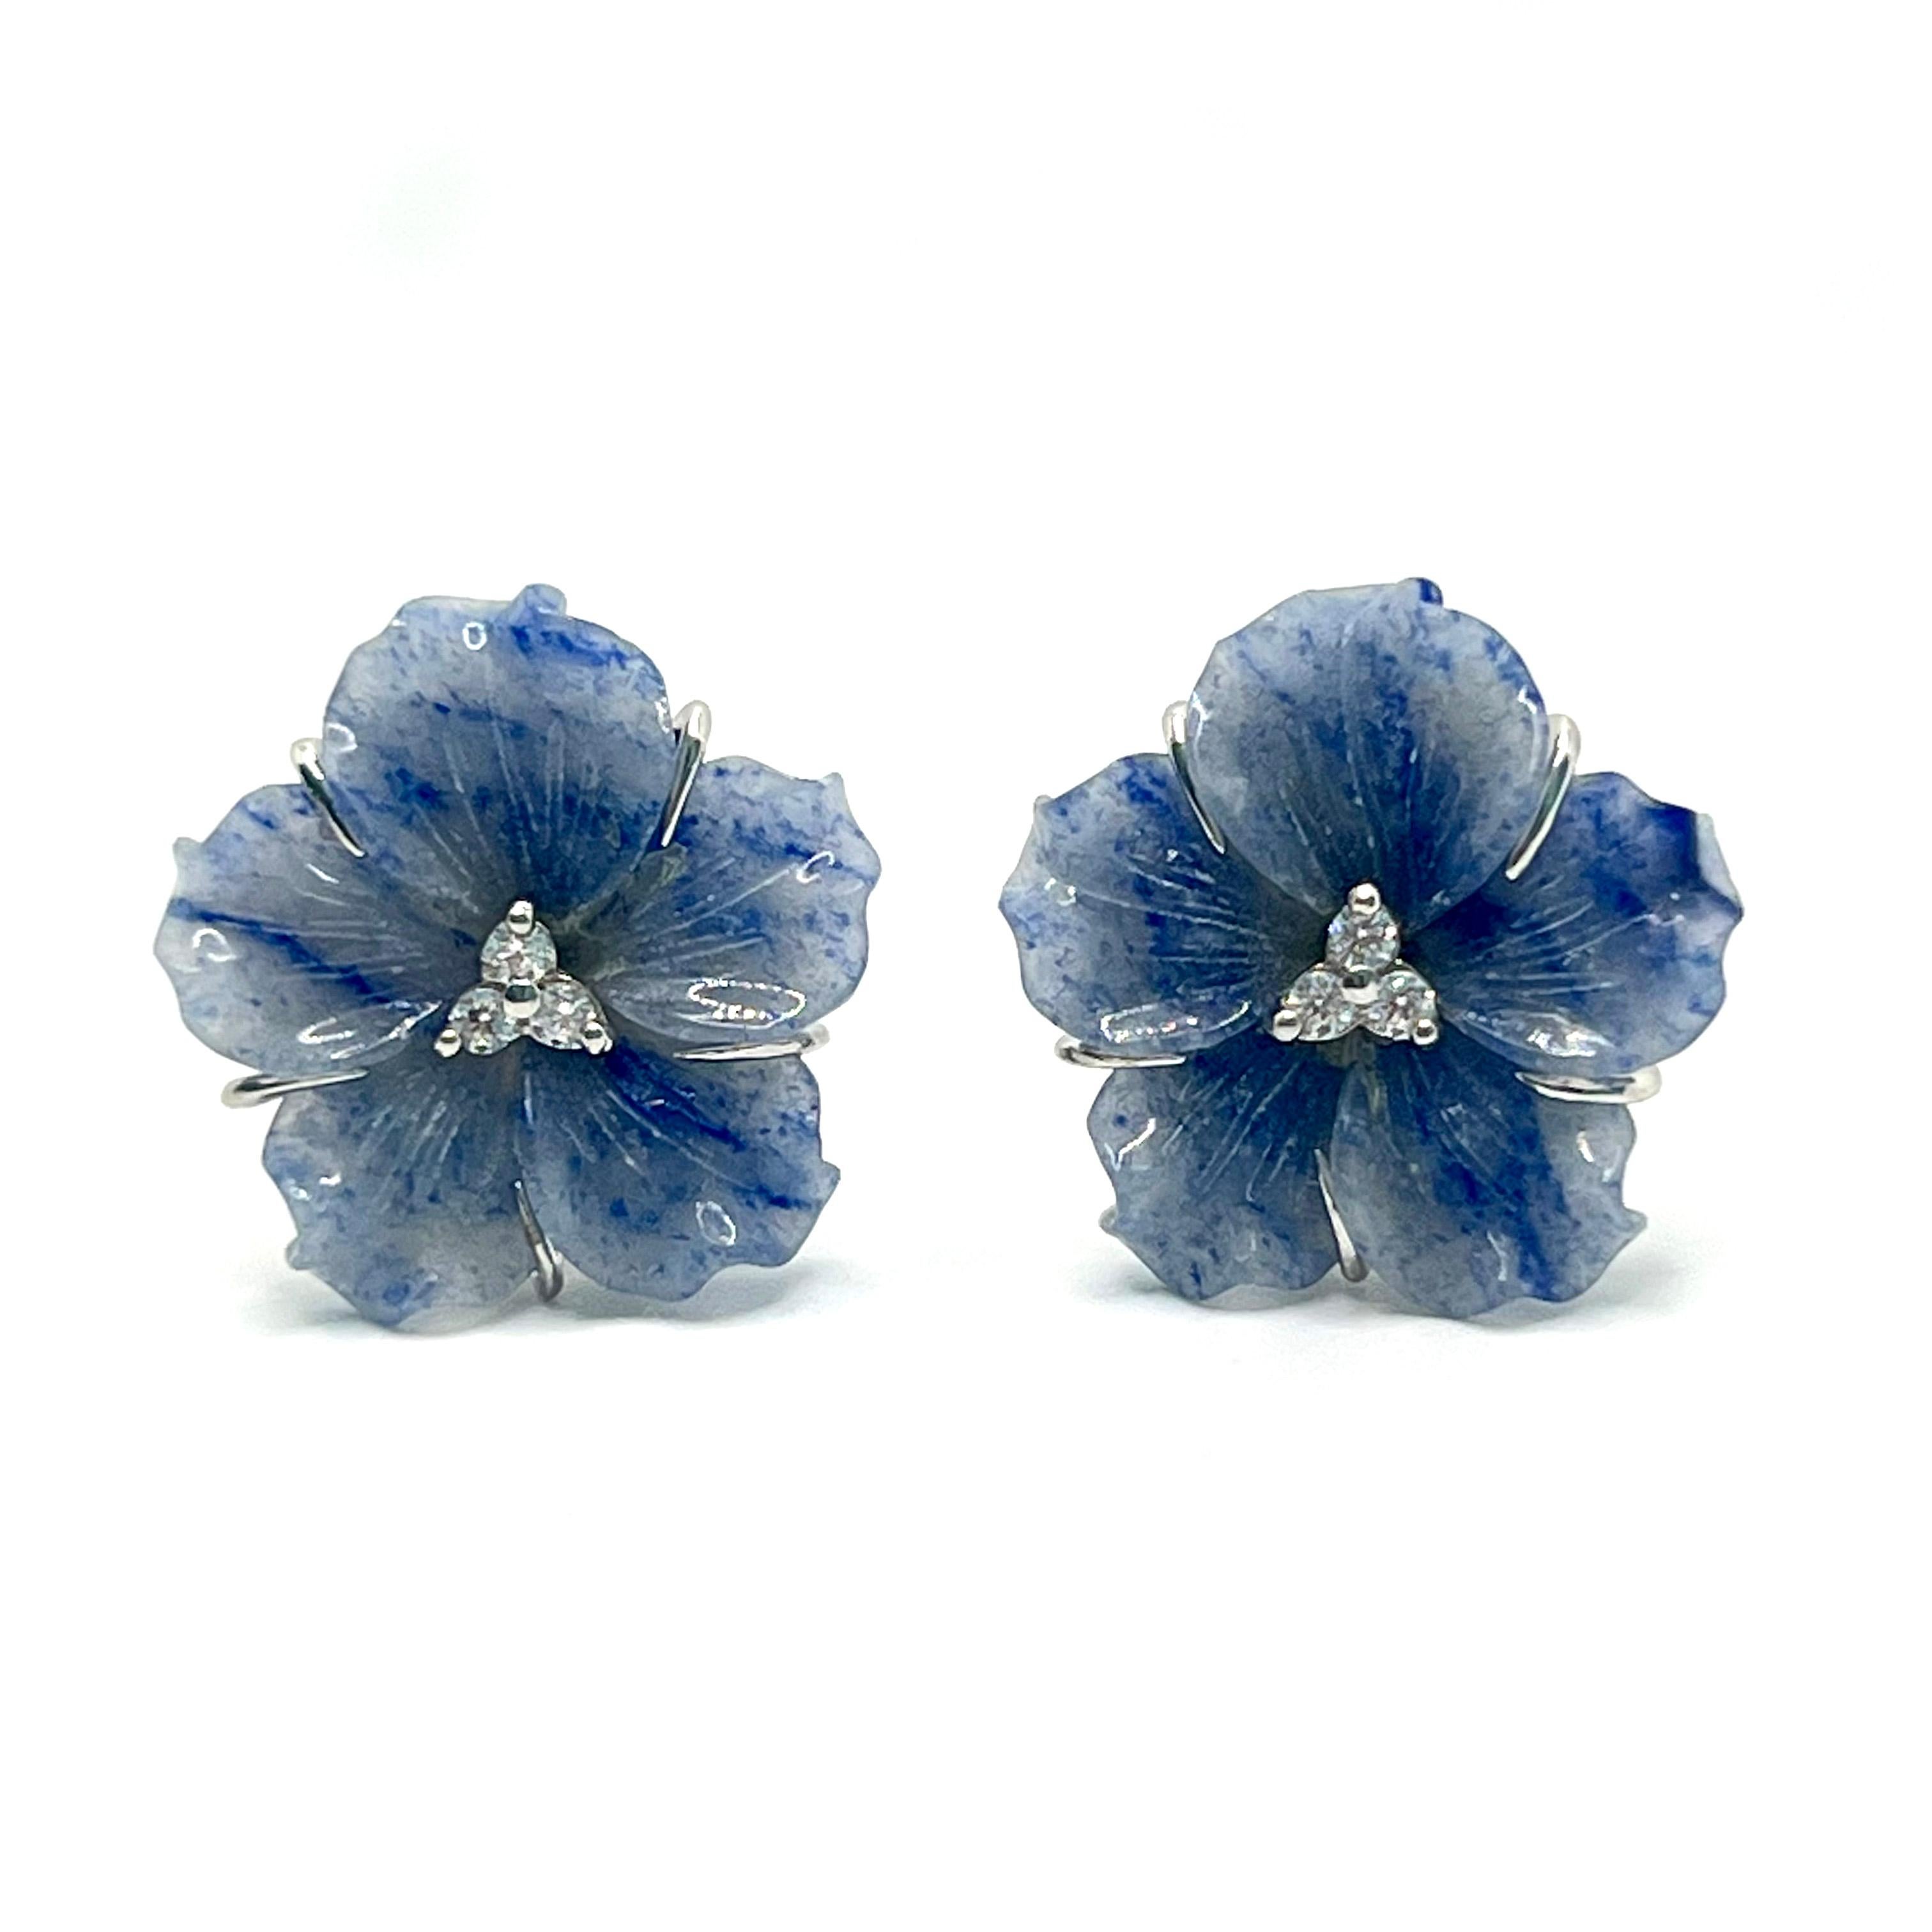 Elegant 23mm Carved Dumortierite Flower Earrings

This gorgeous pair of earrings features 23mm dumortierite carved into beautiful 3D flower, adorned with round simulated diamonds in the center, handset in platinum rhodium plated sterling silver.